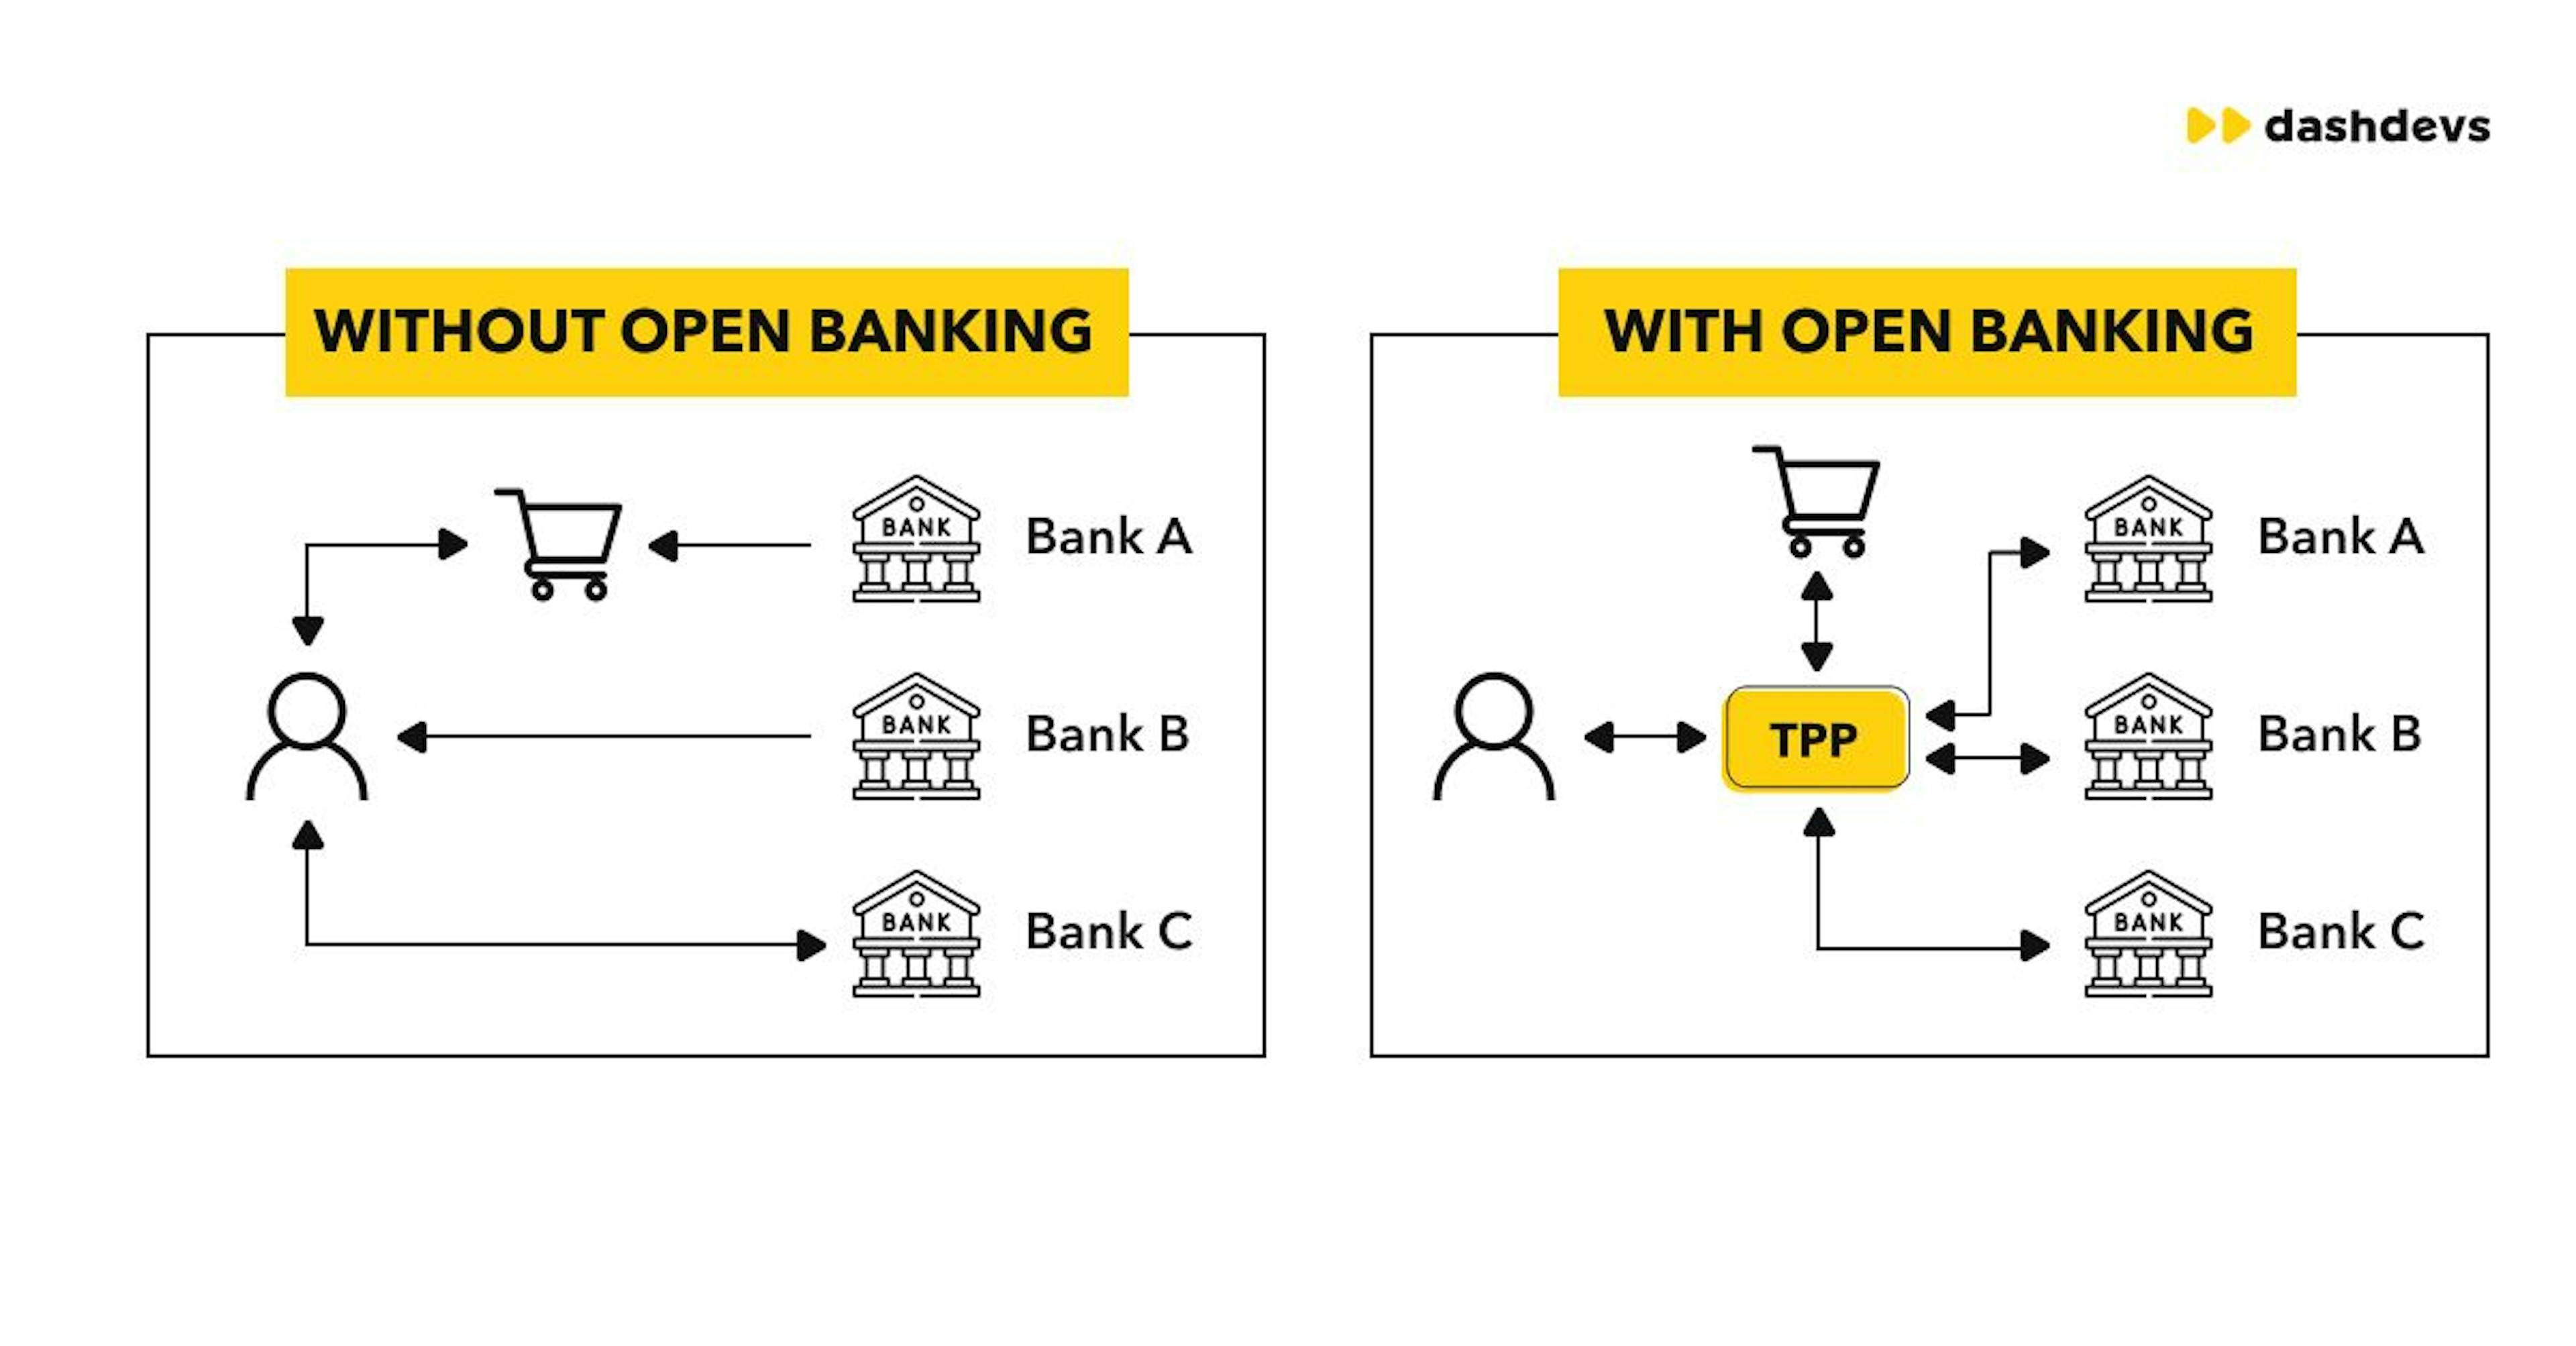 With vs. without Open Banking